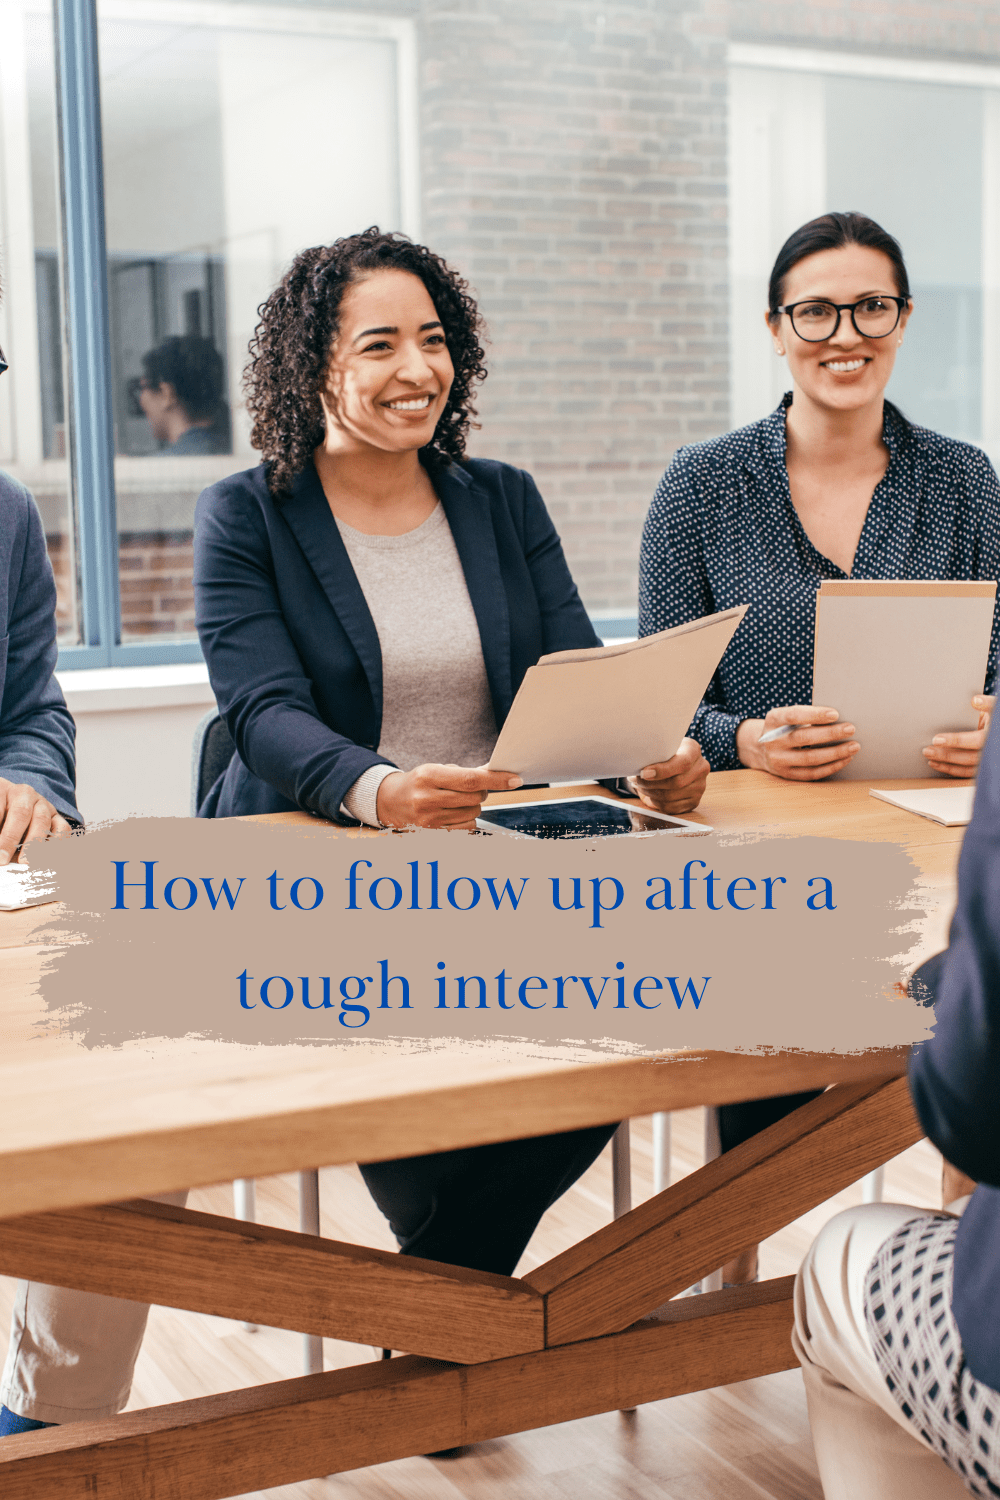 How to follow up after a tough interview